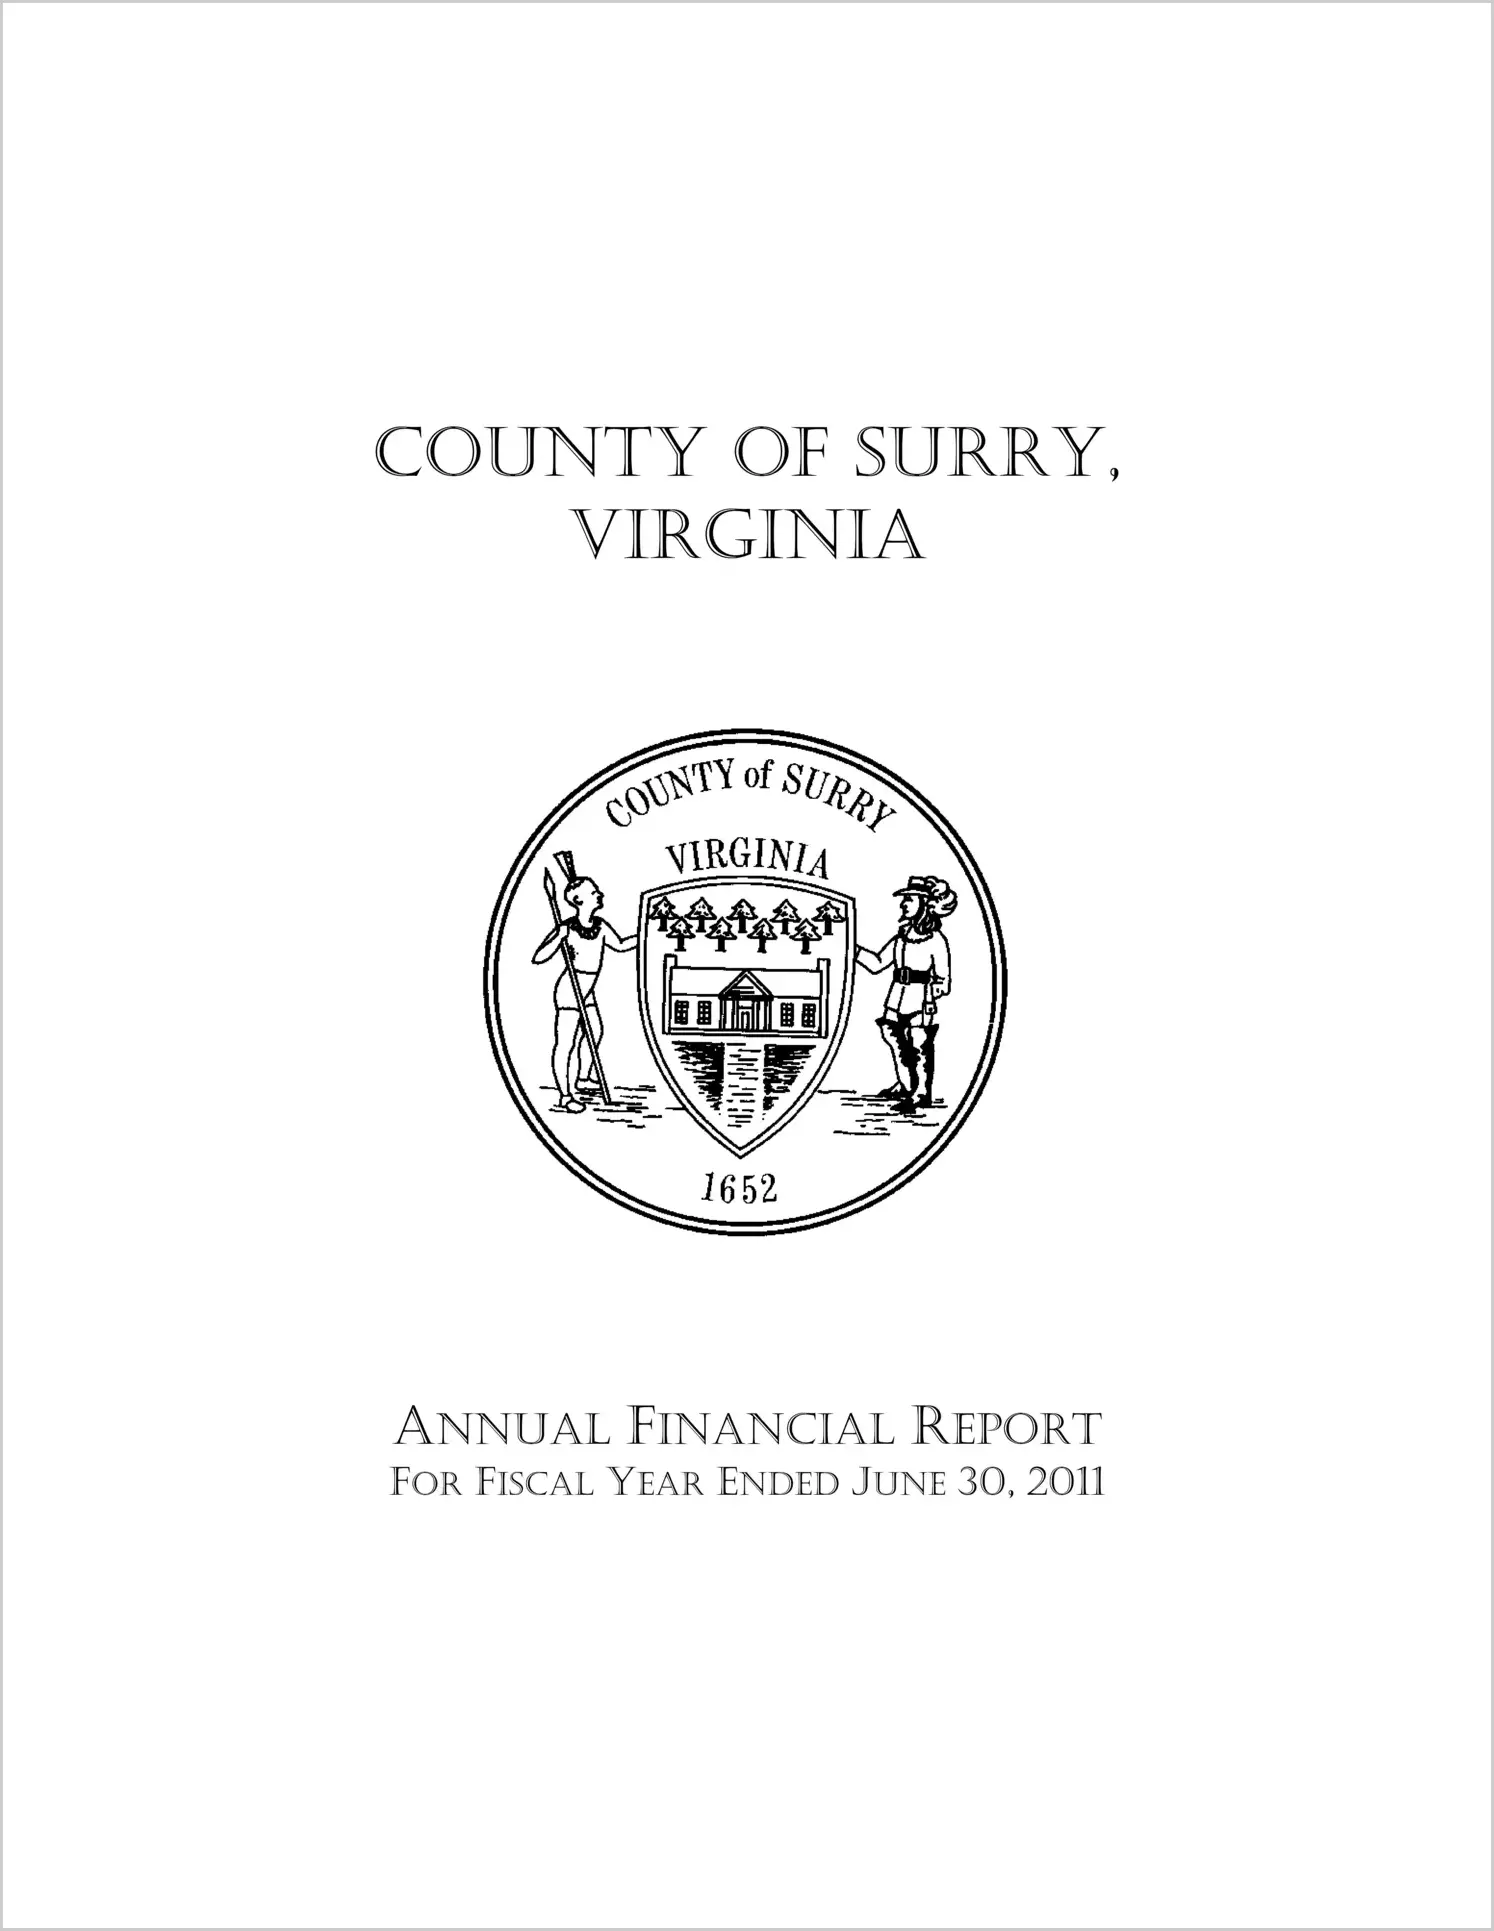 2011 Annual Financial Report for County of Surry